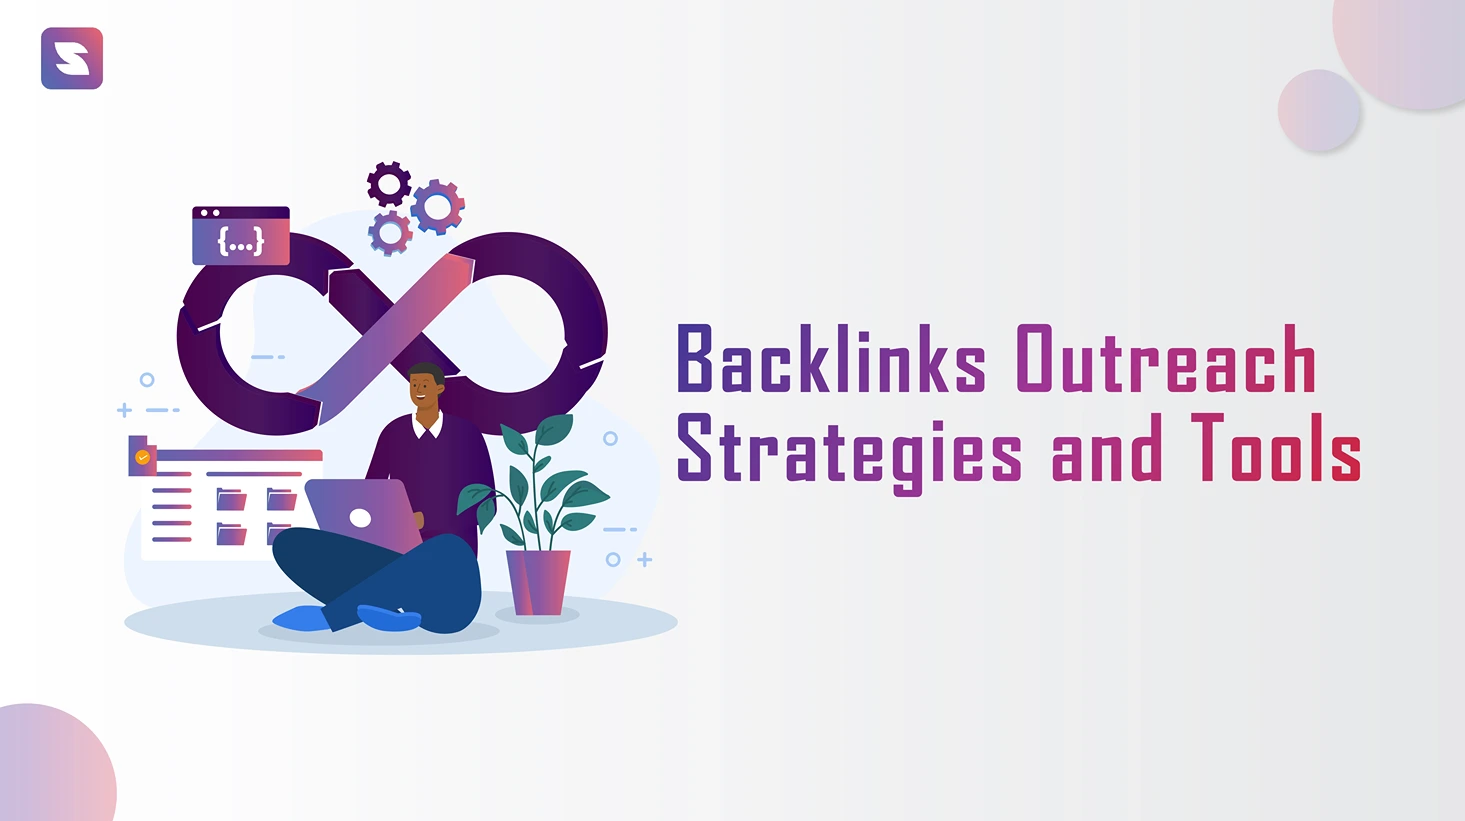 Backlinks Outreach Strategies and Tools